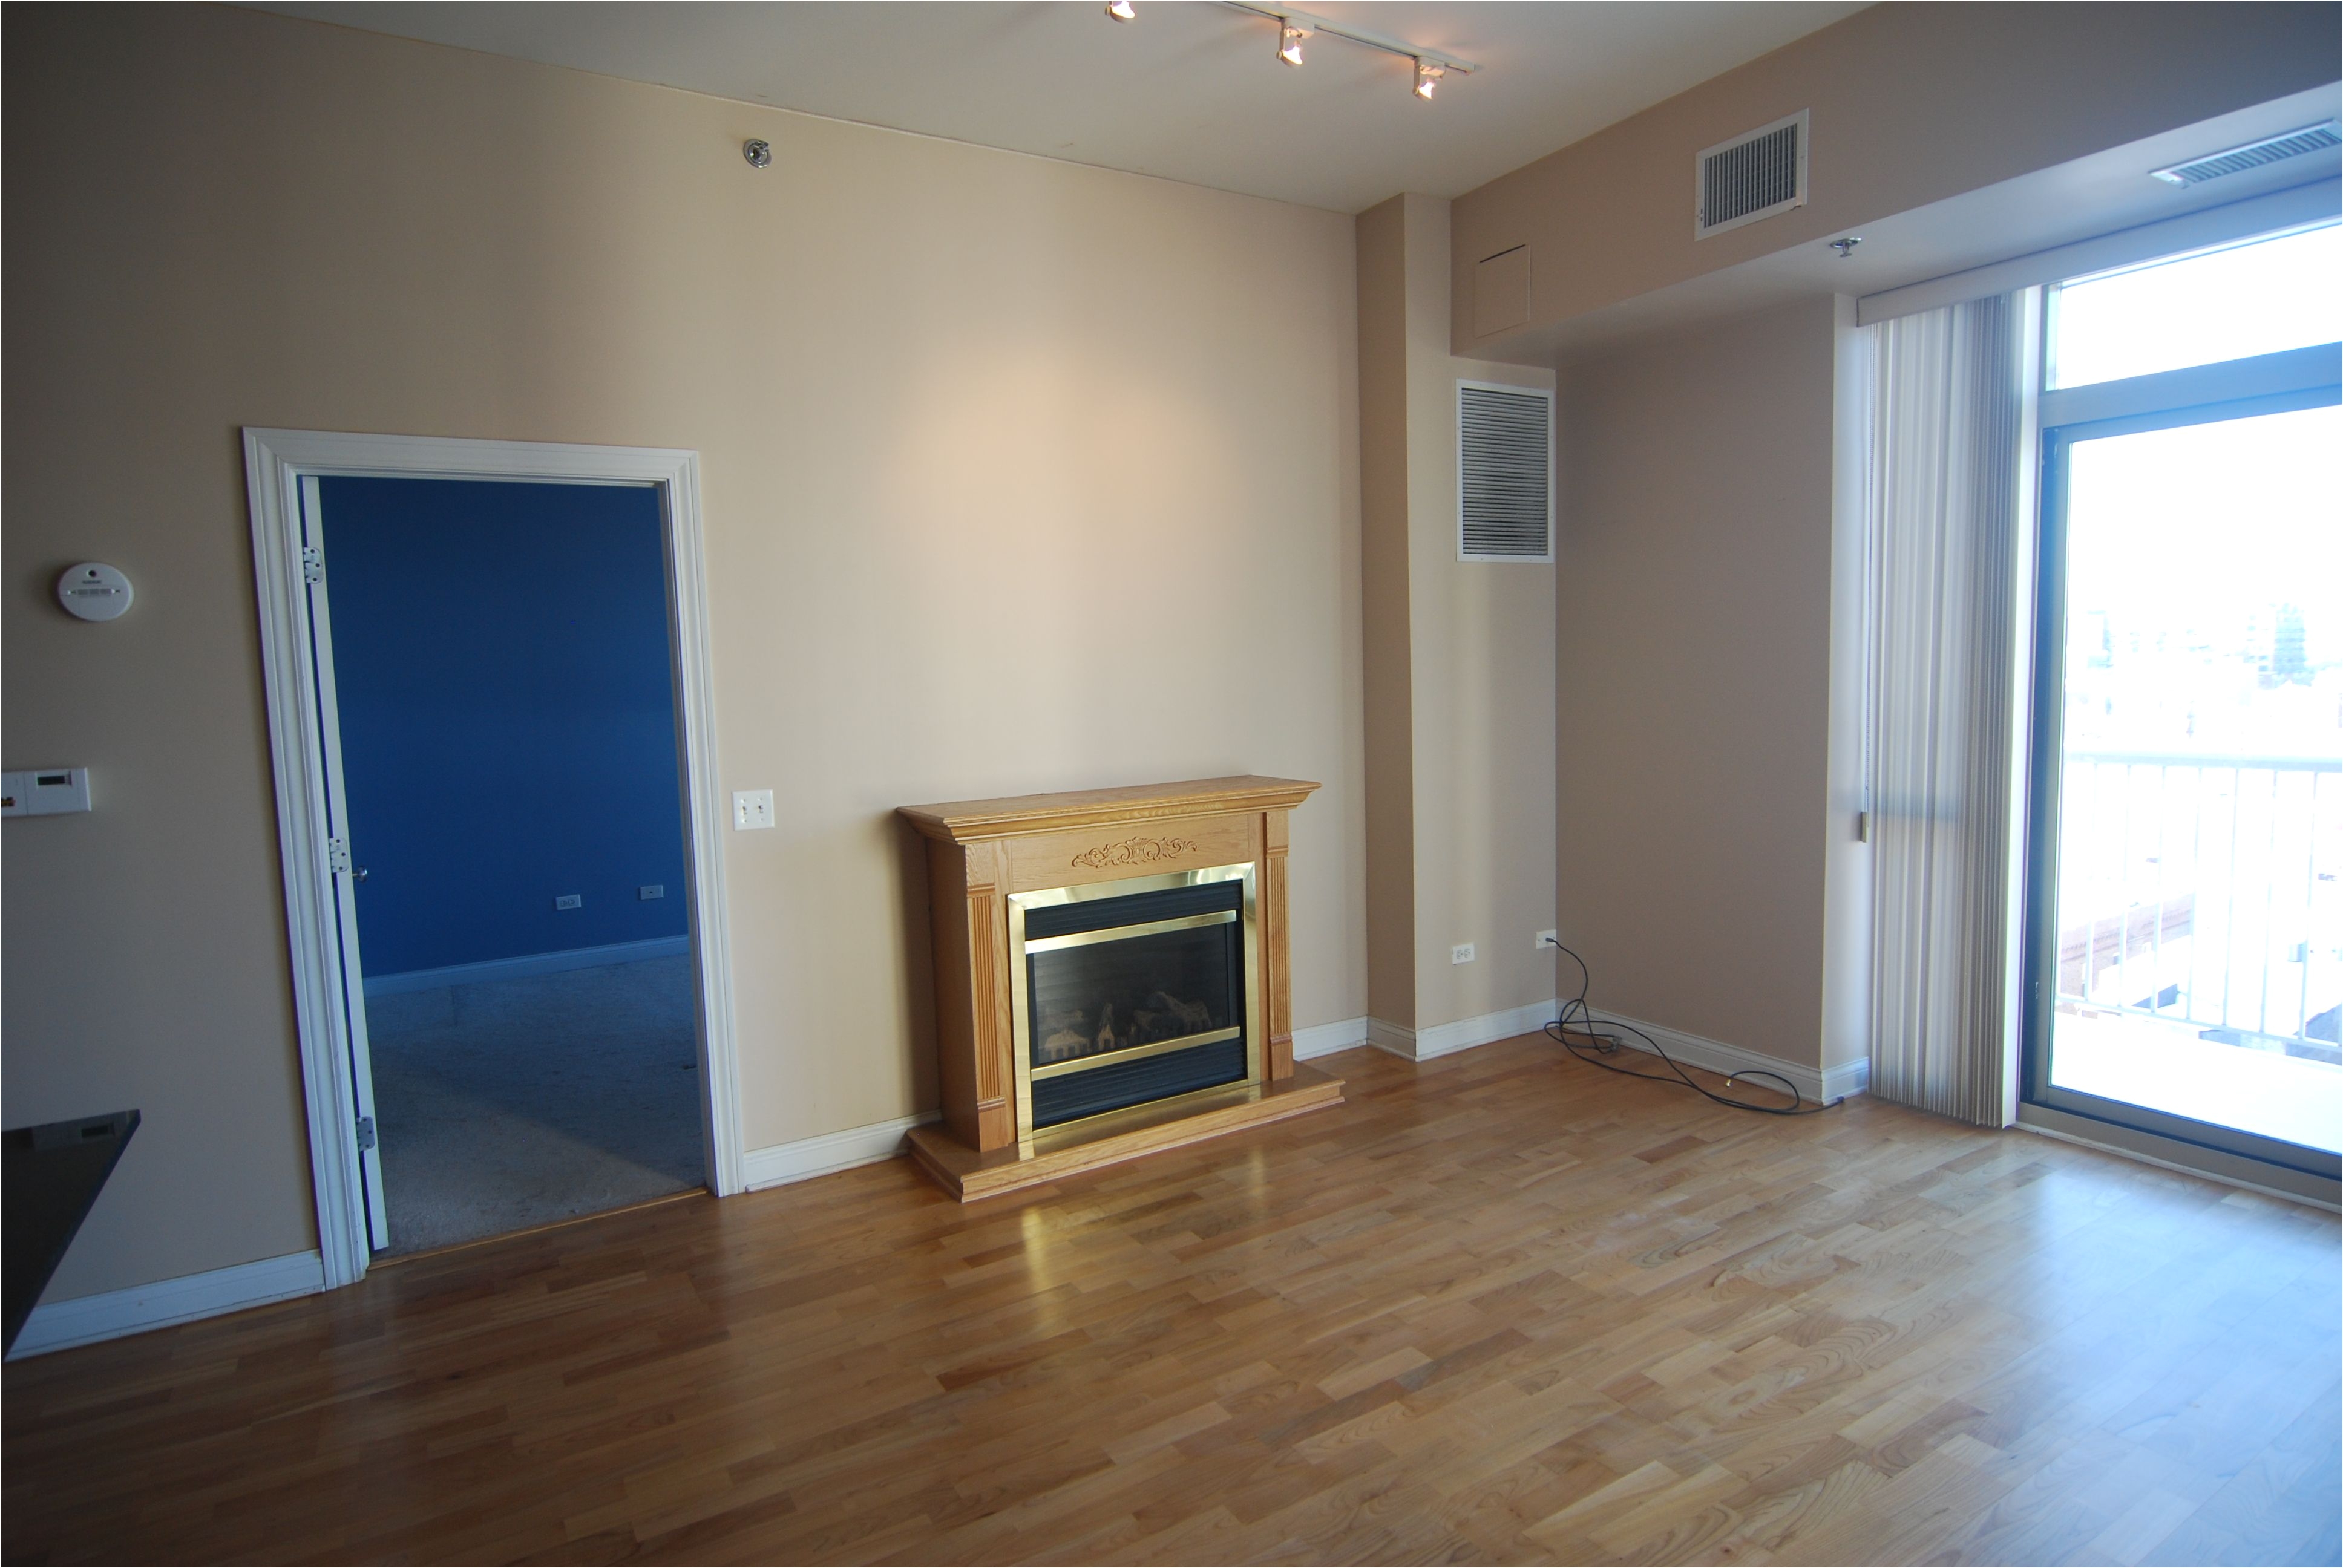 Ac Unit for 2 Bedroom Apartment Beautiful 1 Bedroom Apartment In Old town Unit Features In Unit